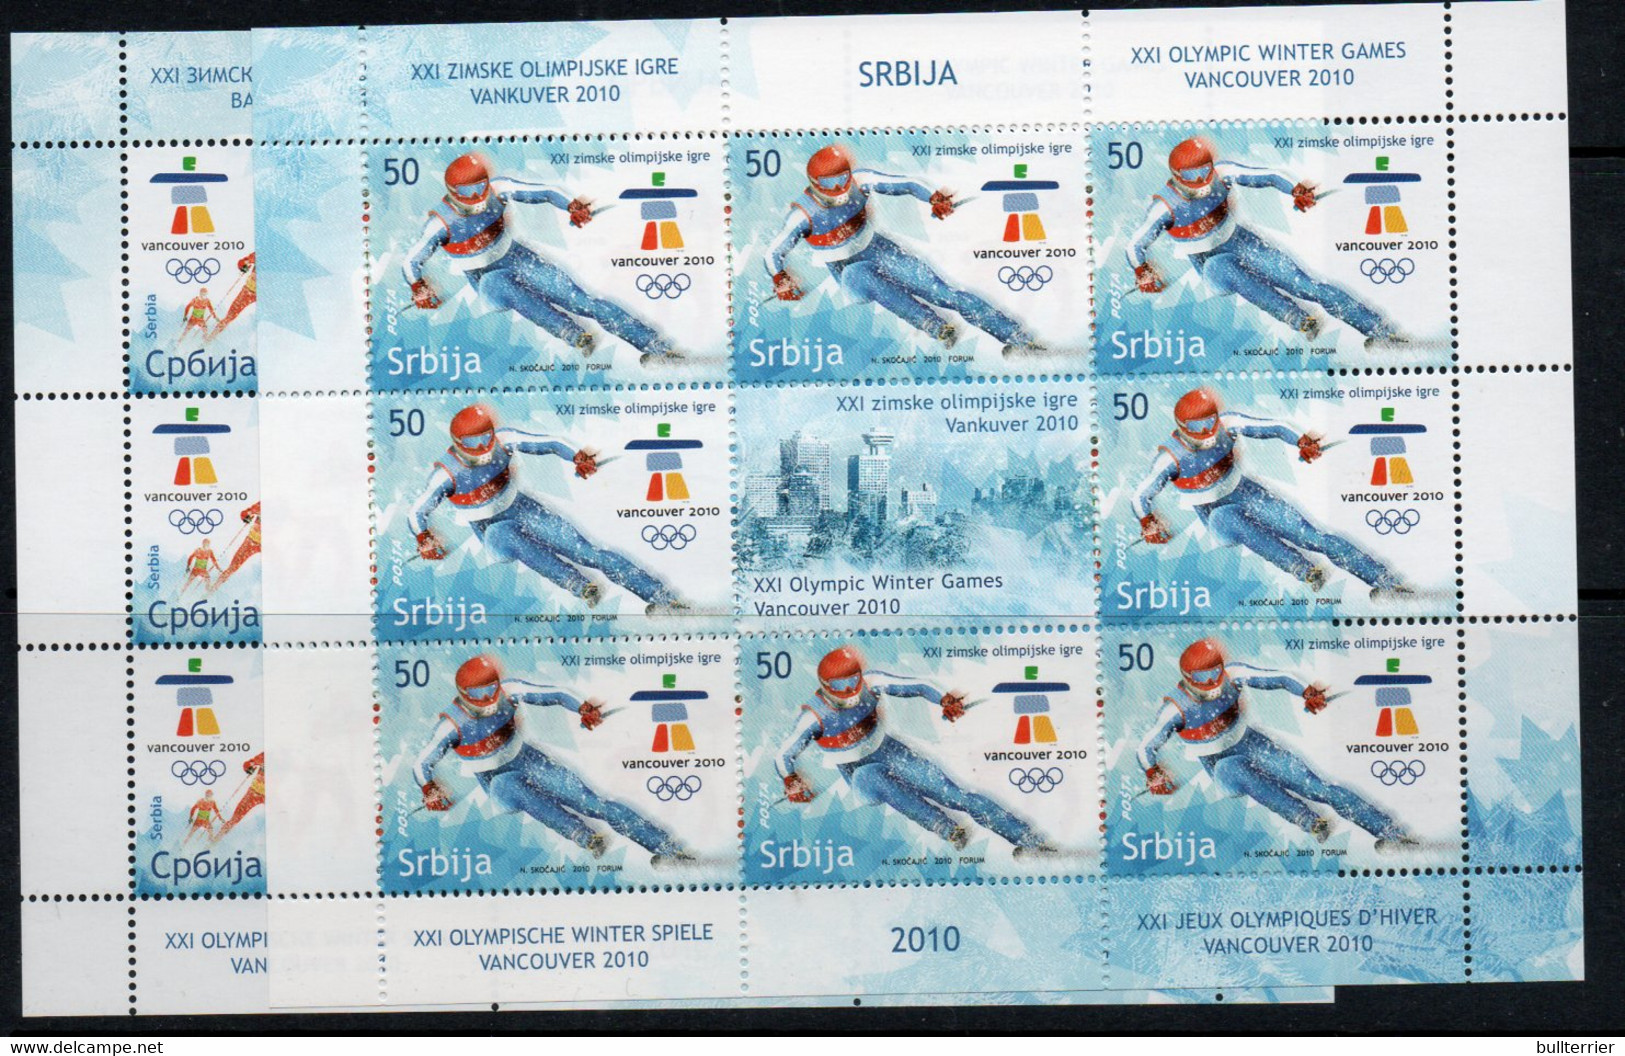 OLYMPICS  -  SERBIA - 2010  - VANCOUVER WINTER OLYMPICS SHEETLETS OF 8 + LABELS  MINT NEVER HINGED - Invierno 2010: Vancouver